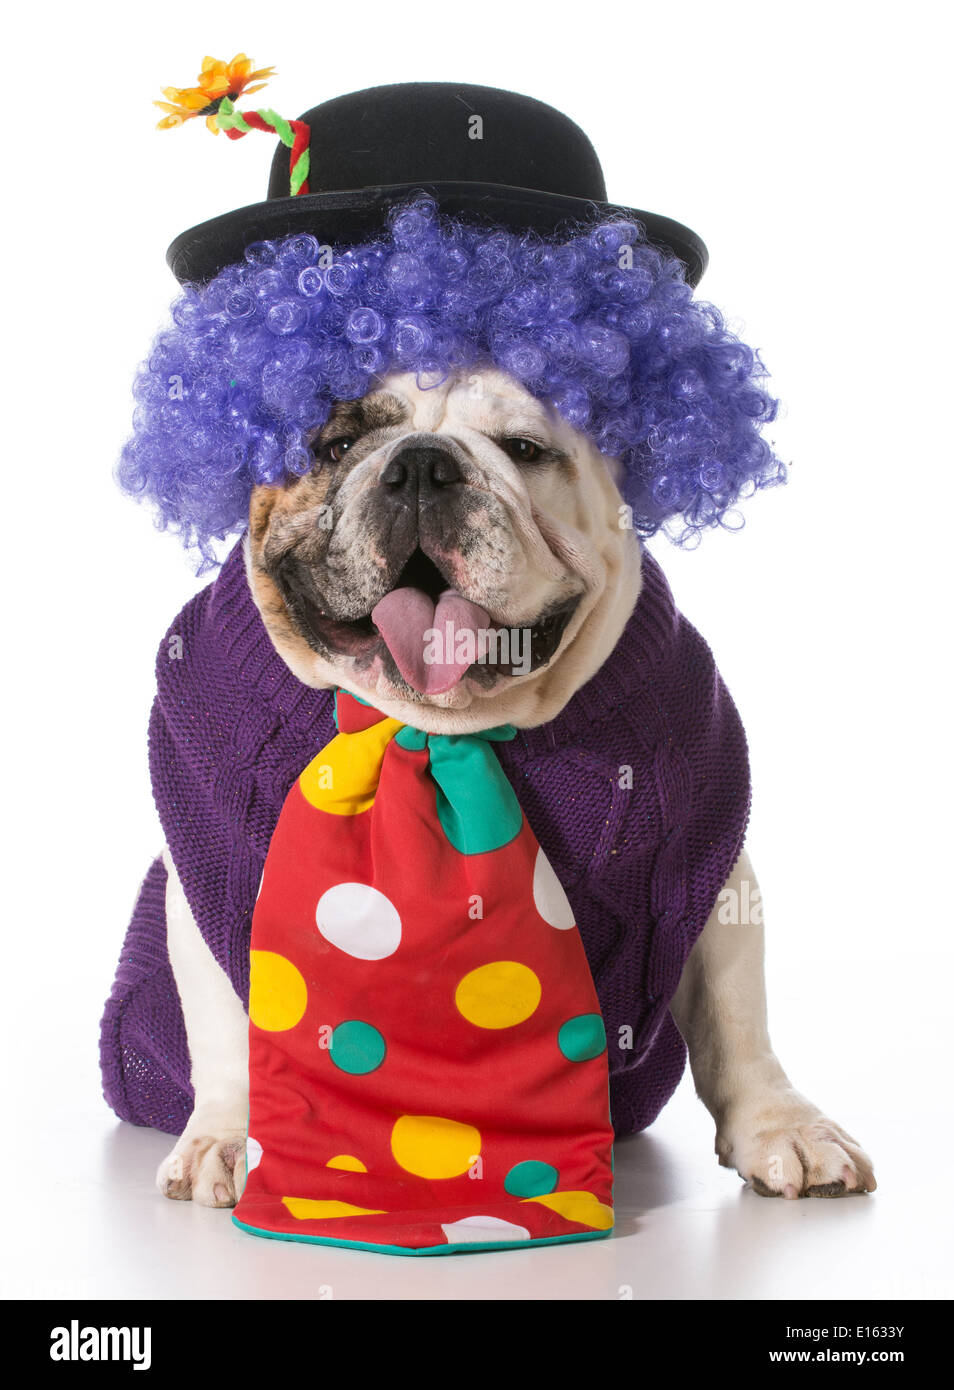 silly dog wearing clown costume on white background Stock Photo